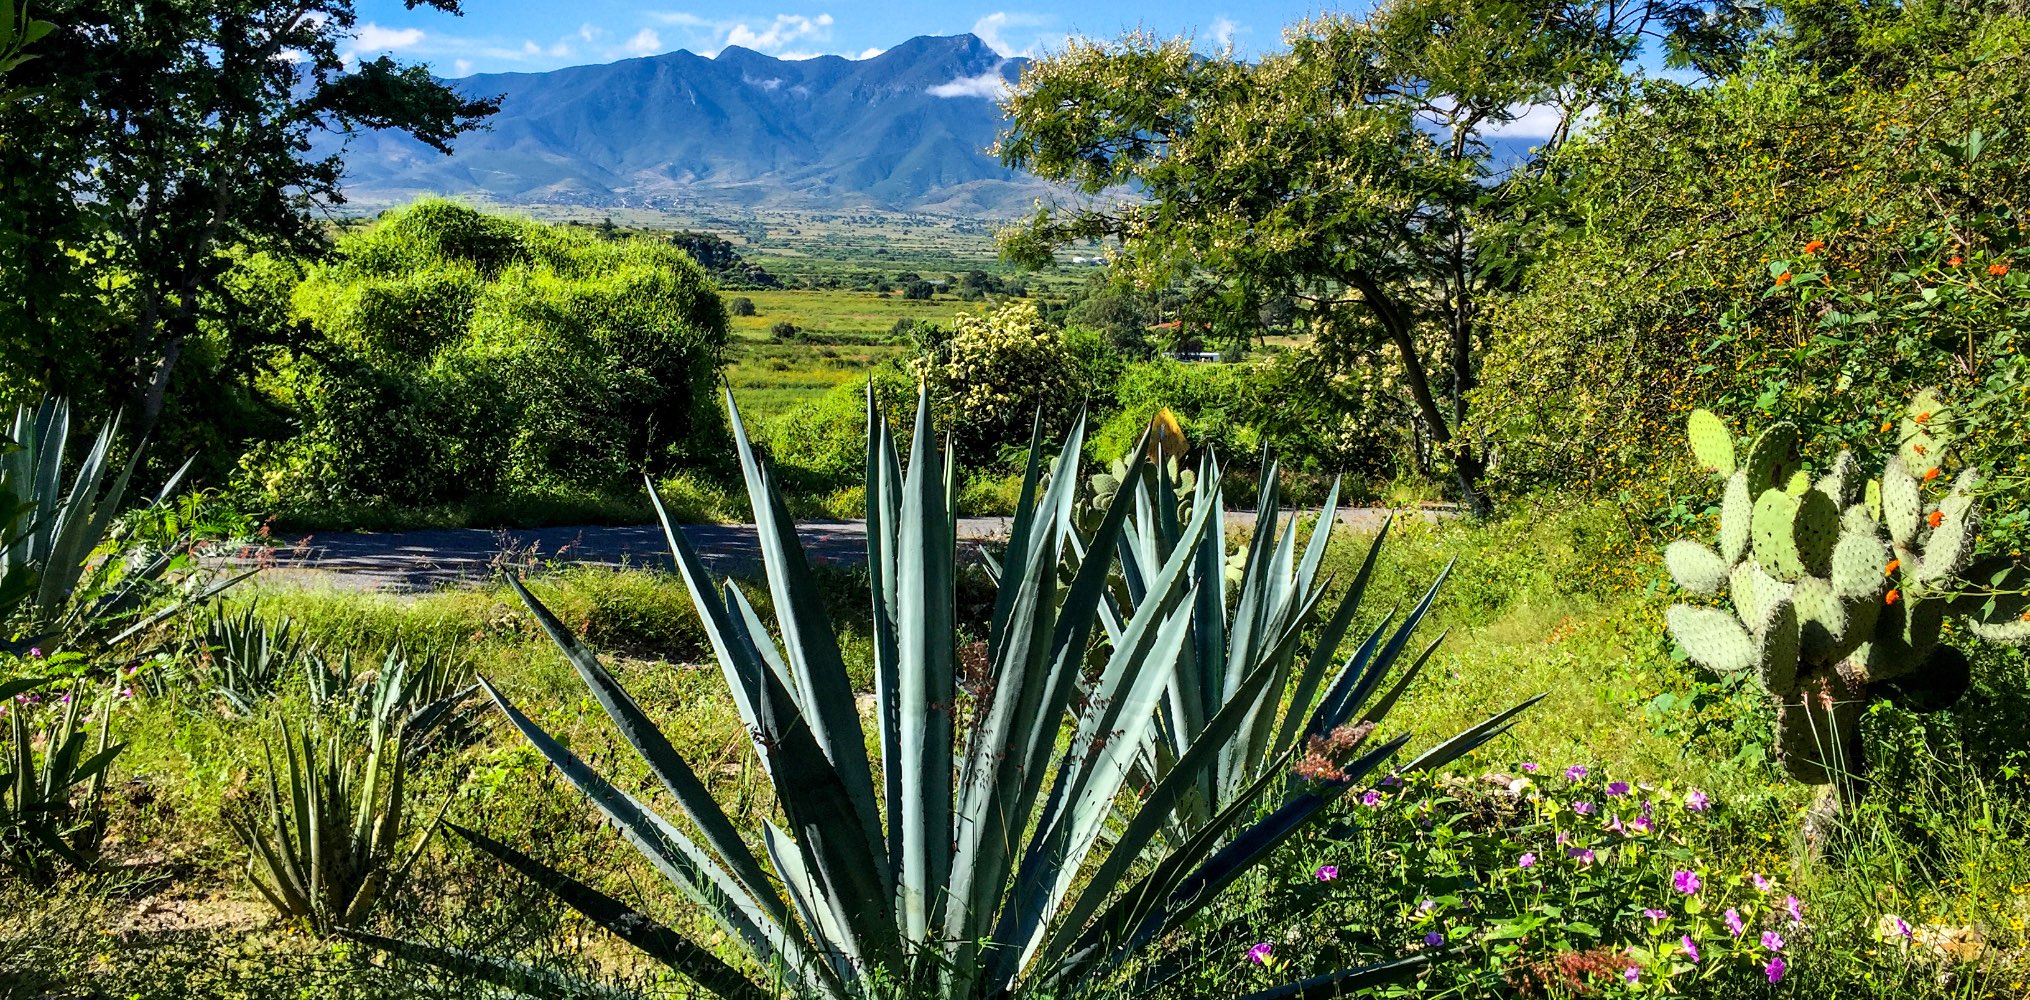 Agave plants in the Oaxaca, Mexico landscape